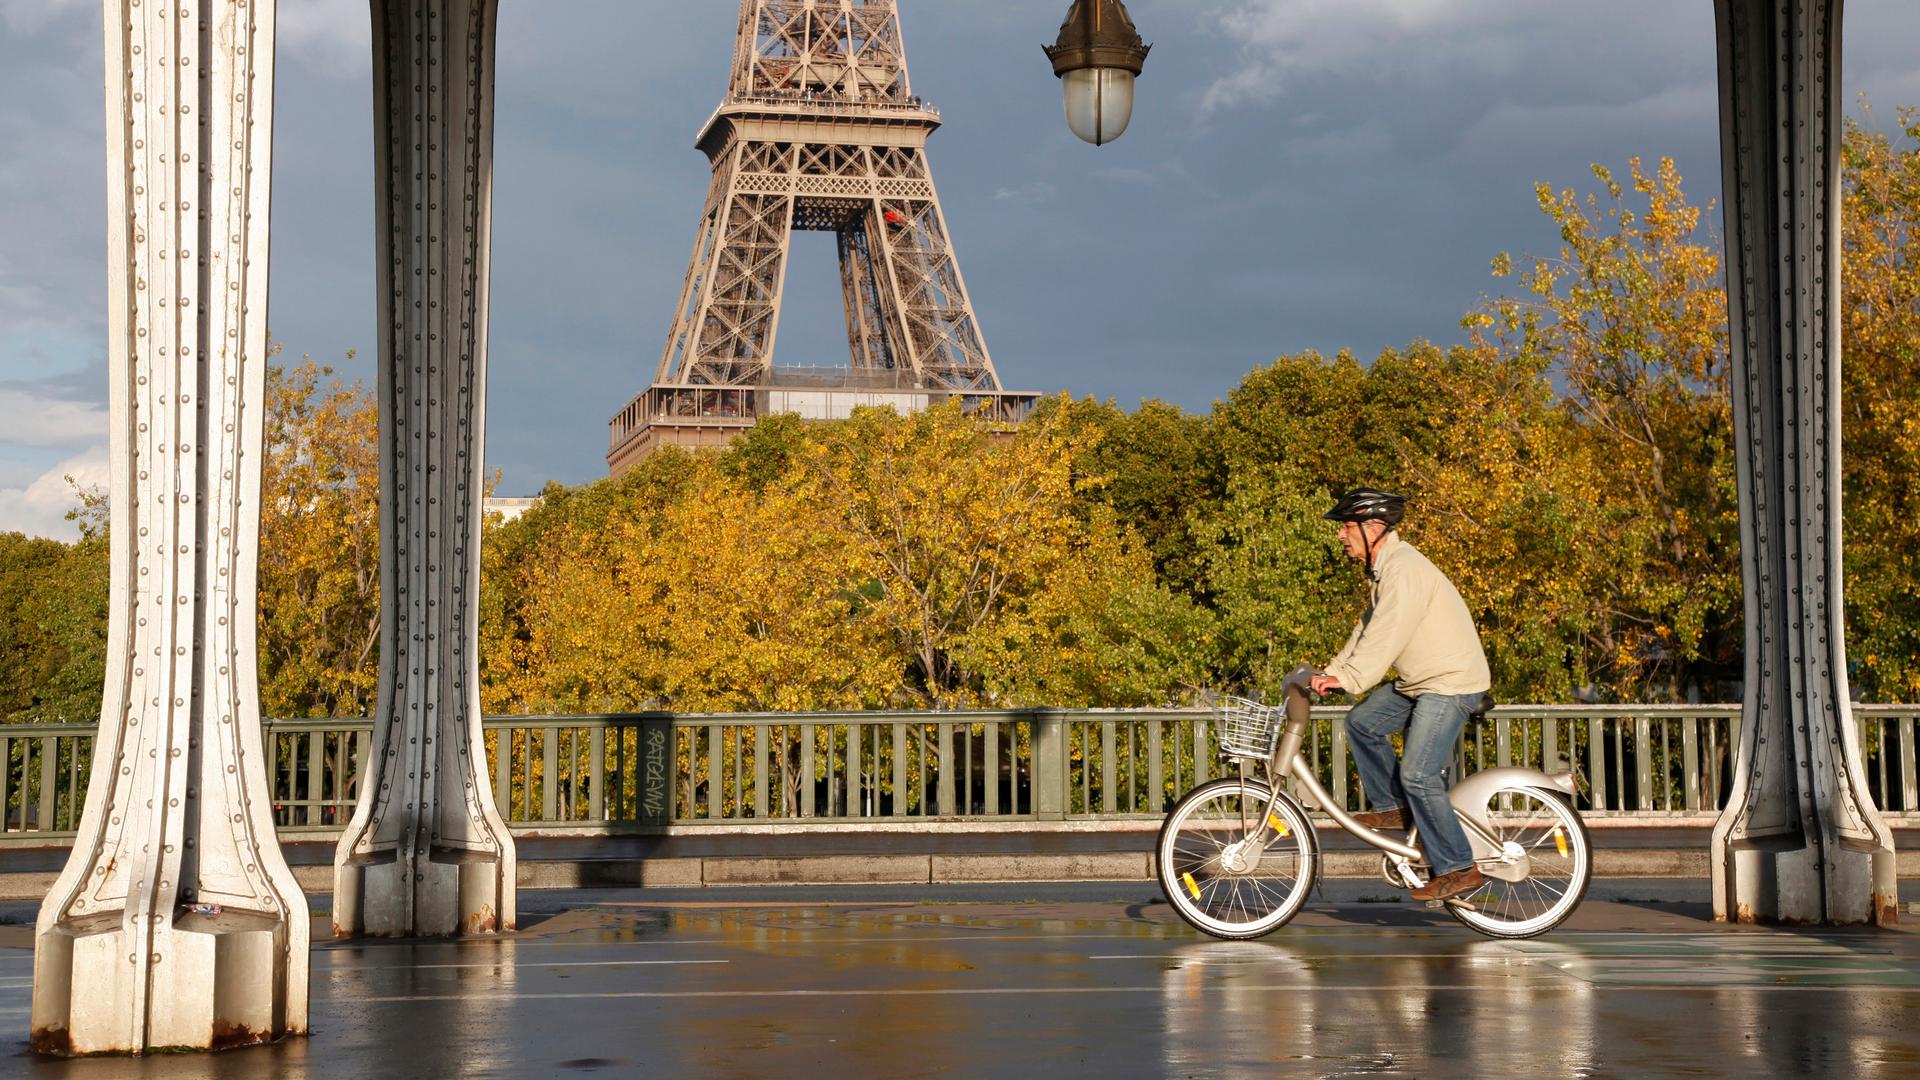 A man rides a Velib self-service public bicycle under an elevated metro line near the the Eiffel Tower after a brief rain shower in Paris October 26, 2013. 